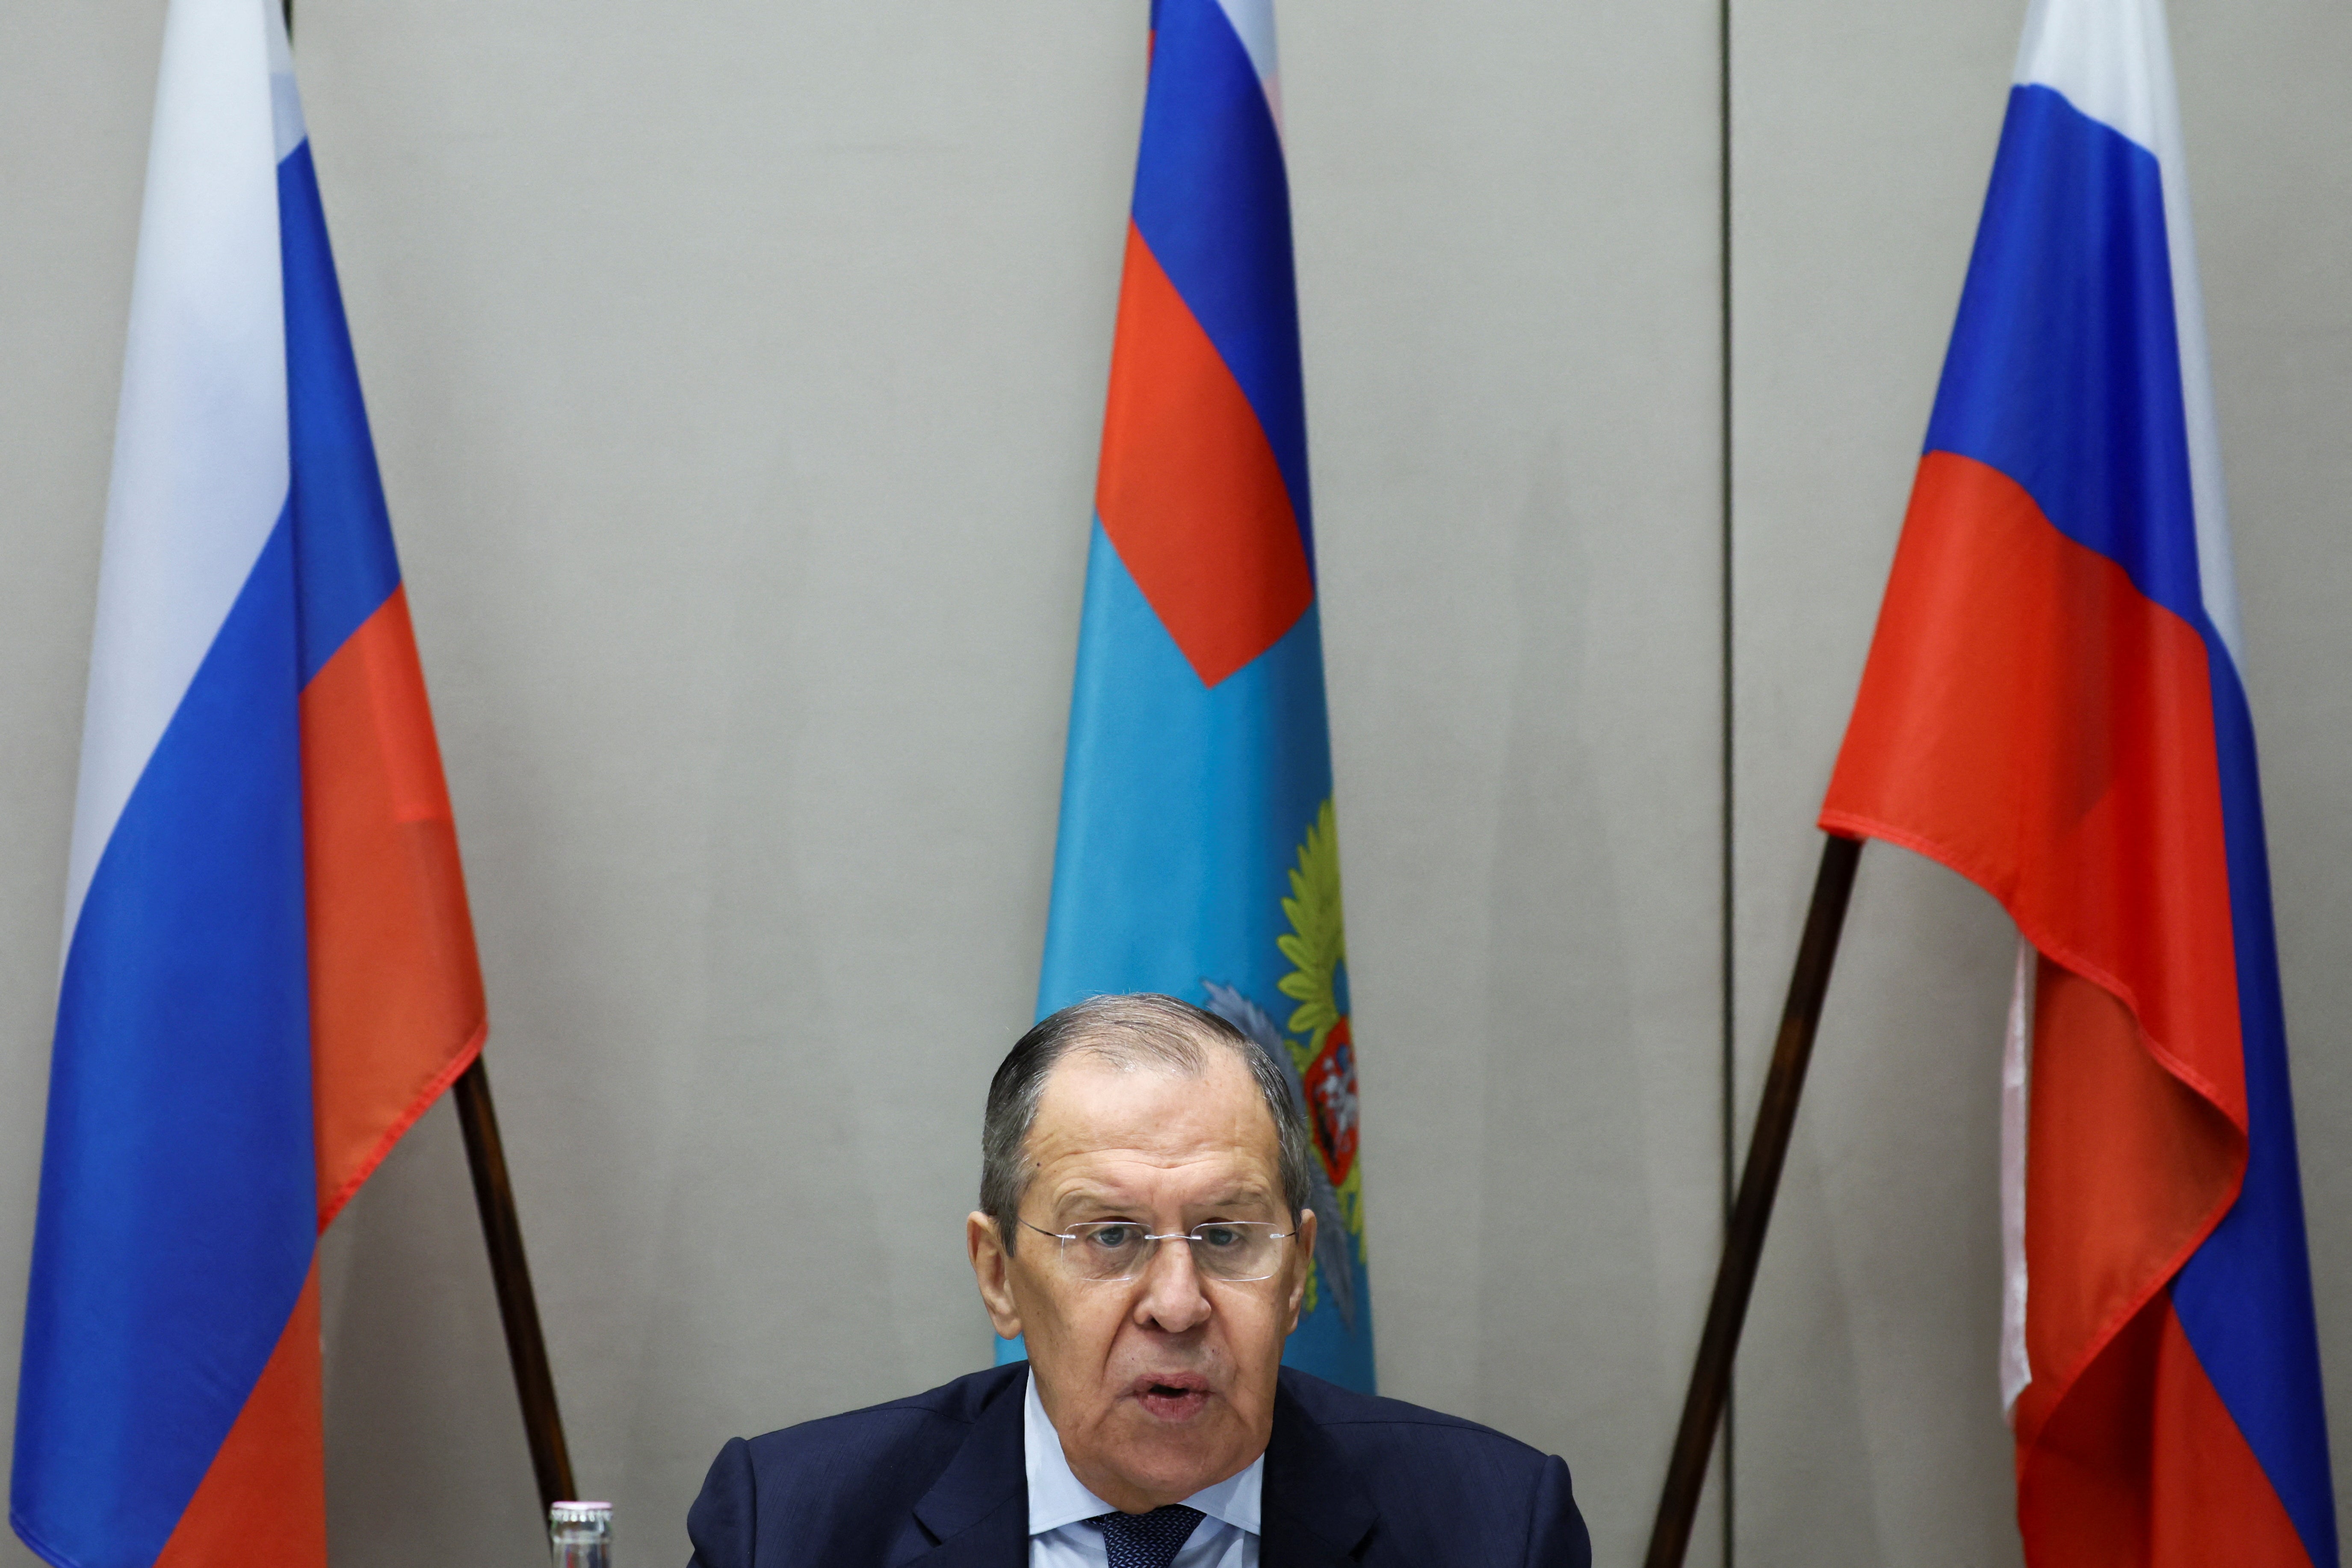 Russian foreign minister Sergei Lavrov speaks during a news conference after his meeting with US secretary of state Antony Blinken about tensions over Ukraine, in Geneva